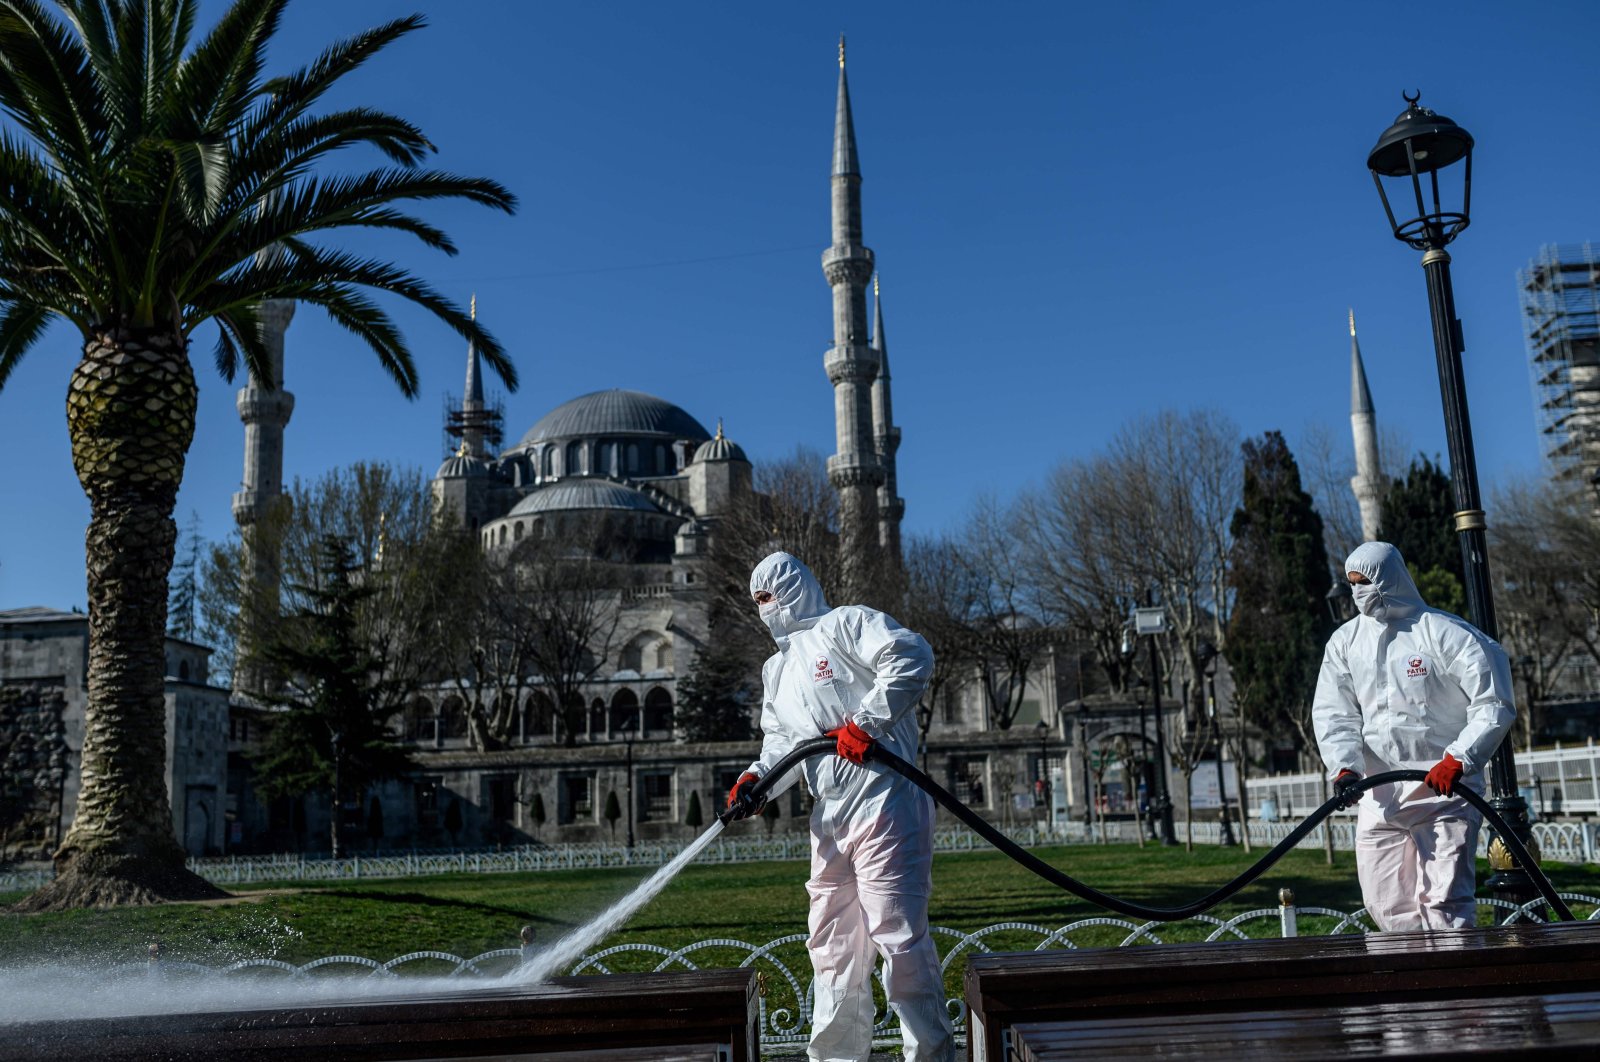 Members of the Fatih Municipality disinfect Istanbul's Sultanahmet Square with the Blue Mosque in the background to prevent the spread of the coronavirus, March 21, 2020. (AFP Photo)